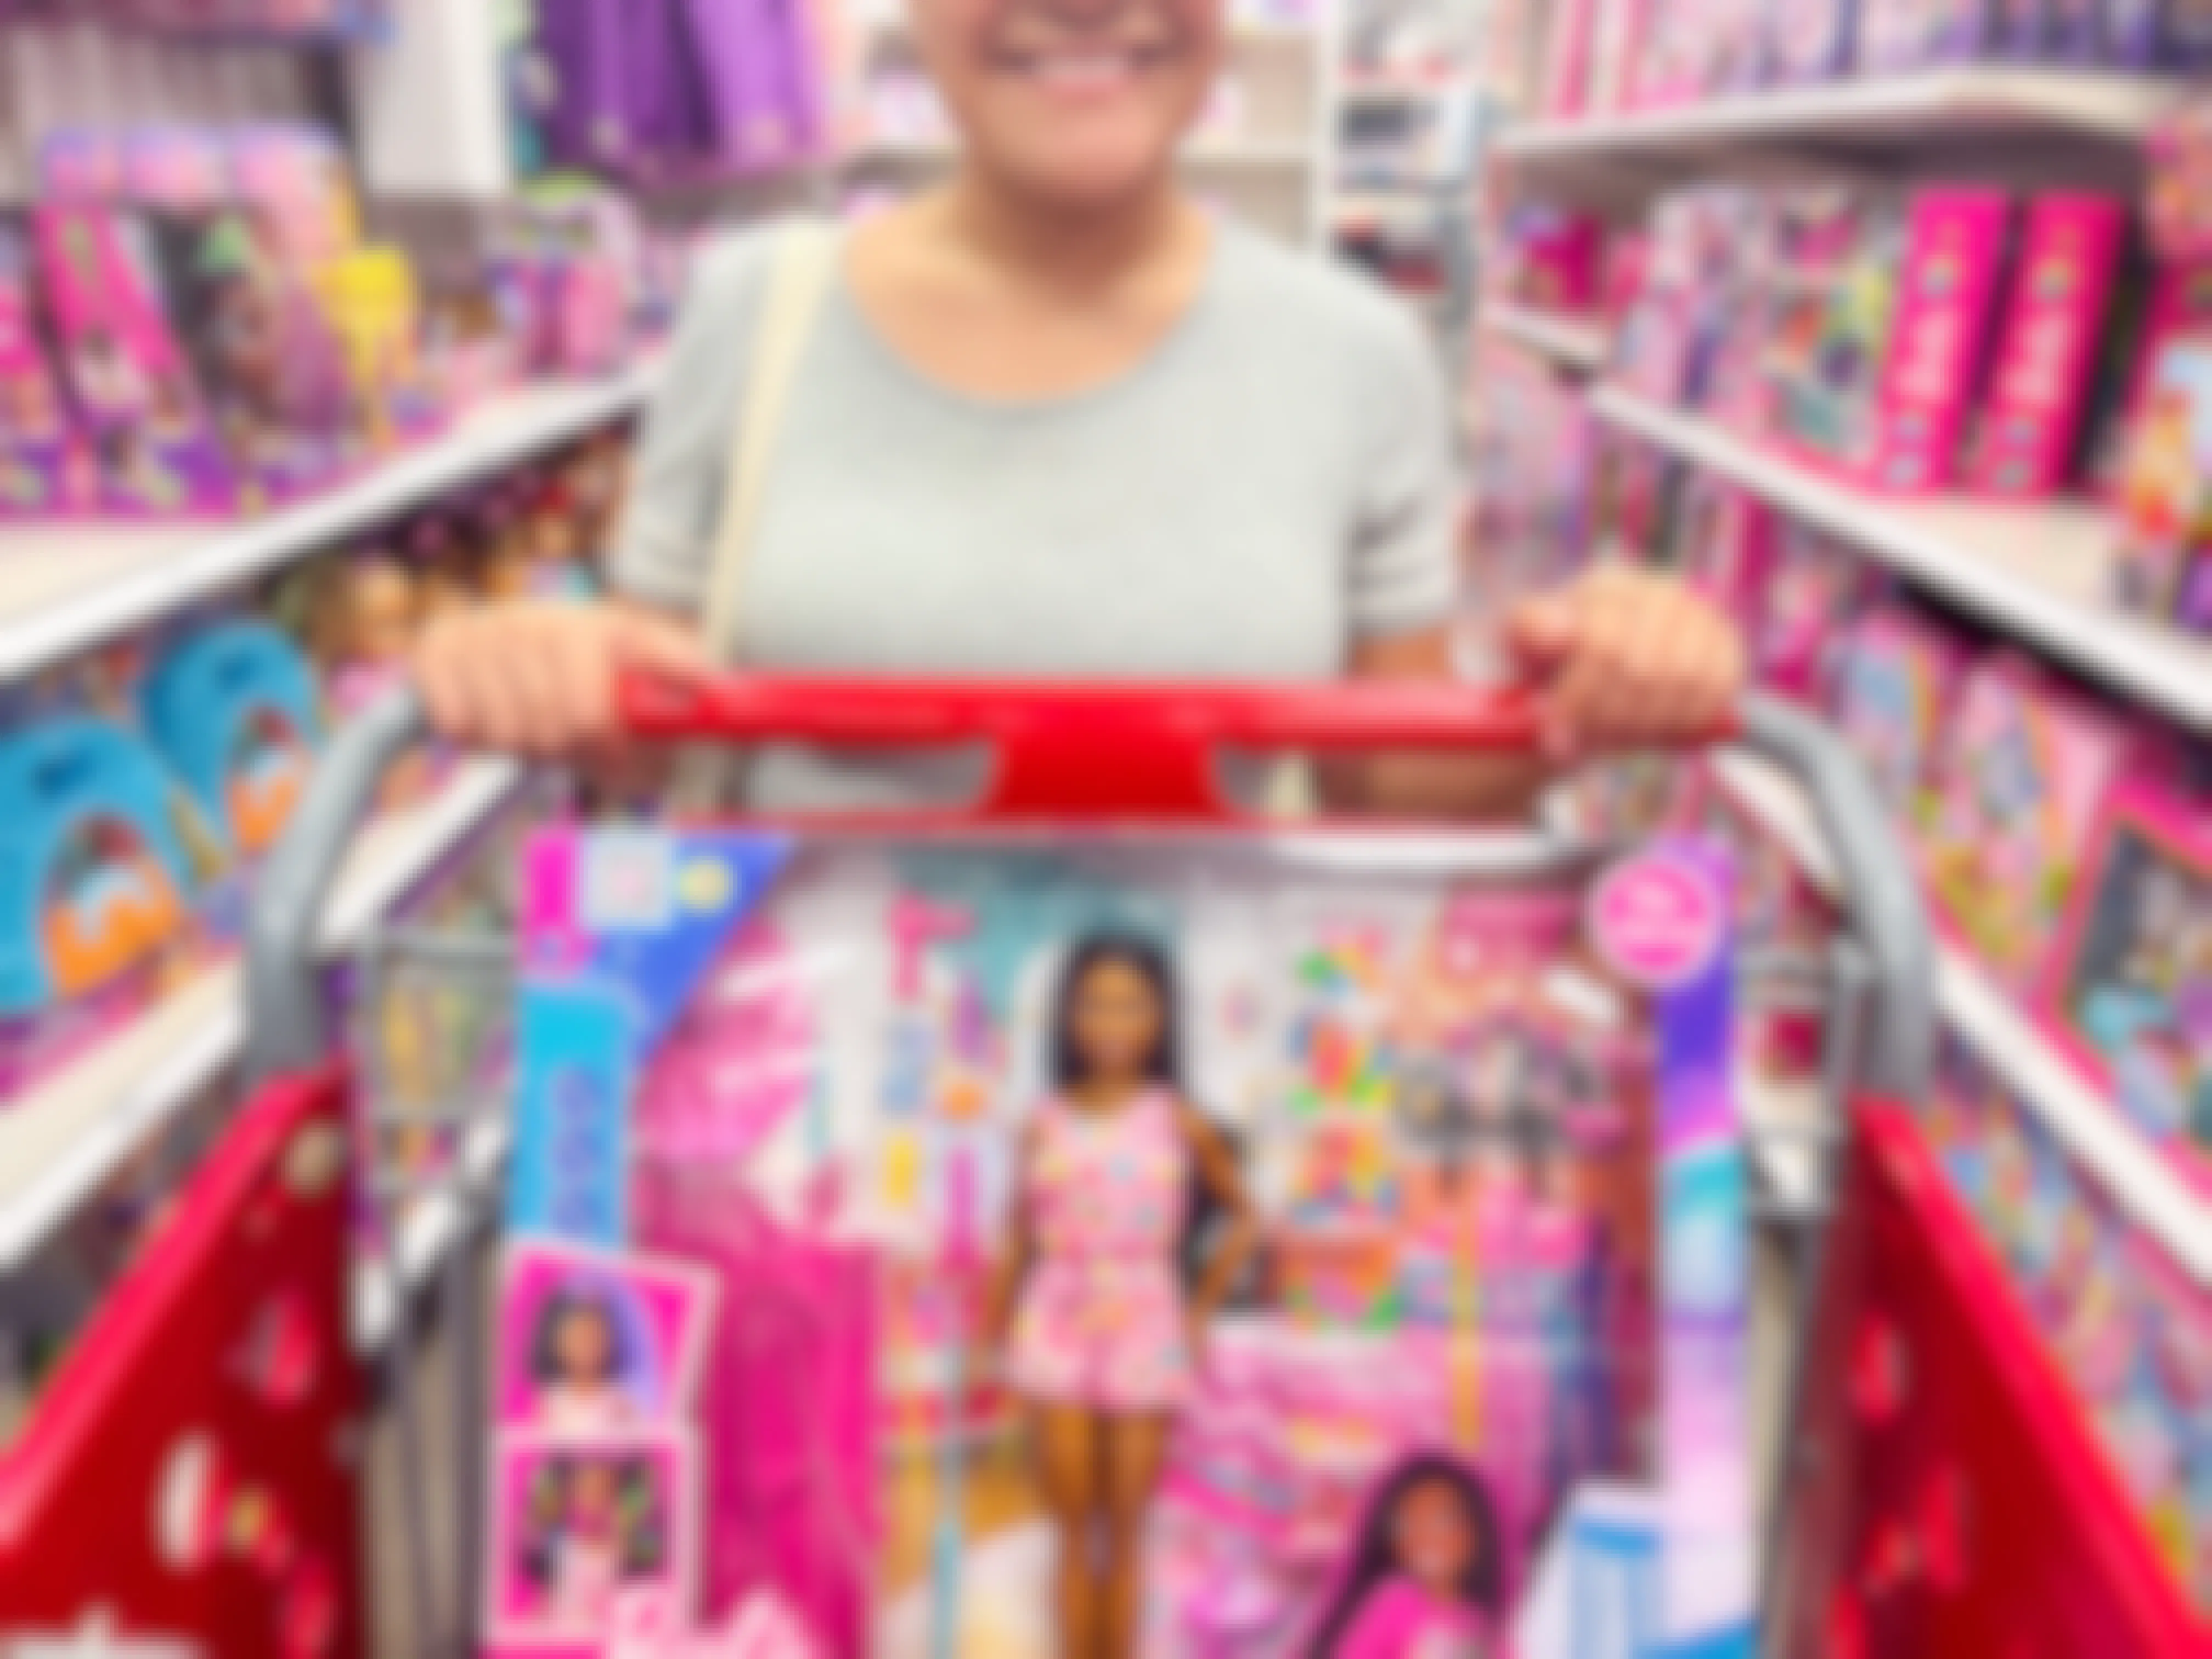 Person pushing a cart with a barbie toy inside